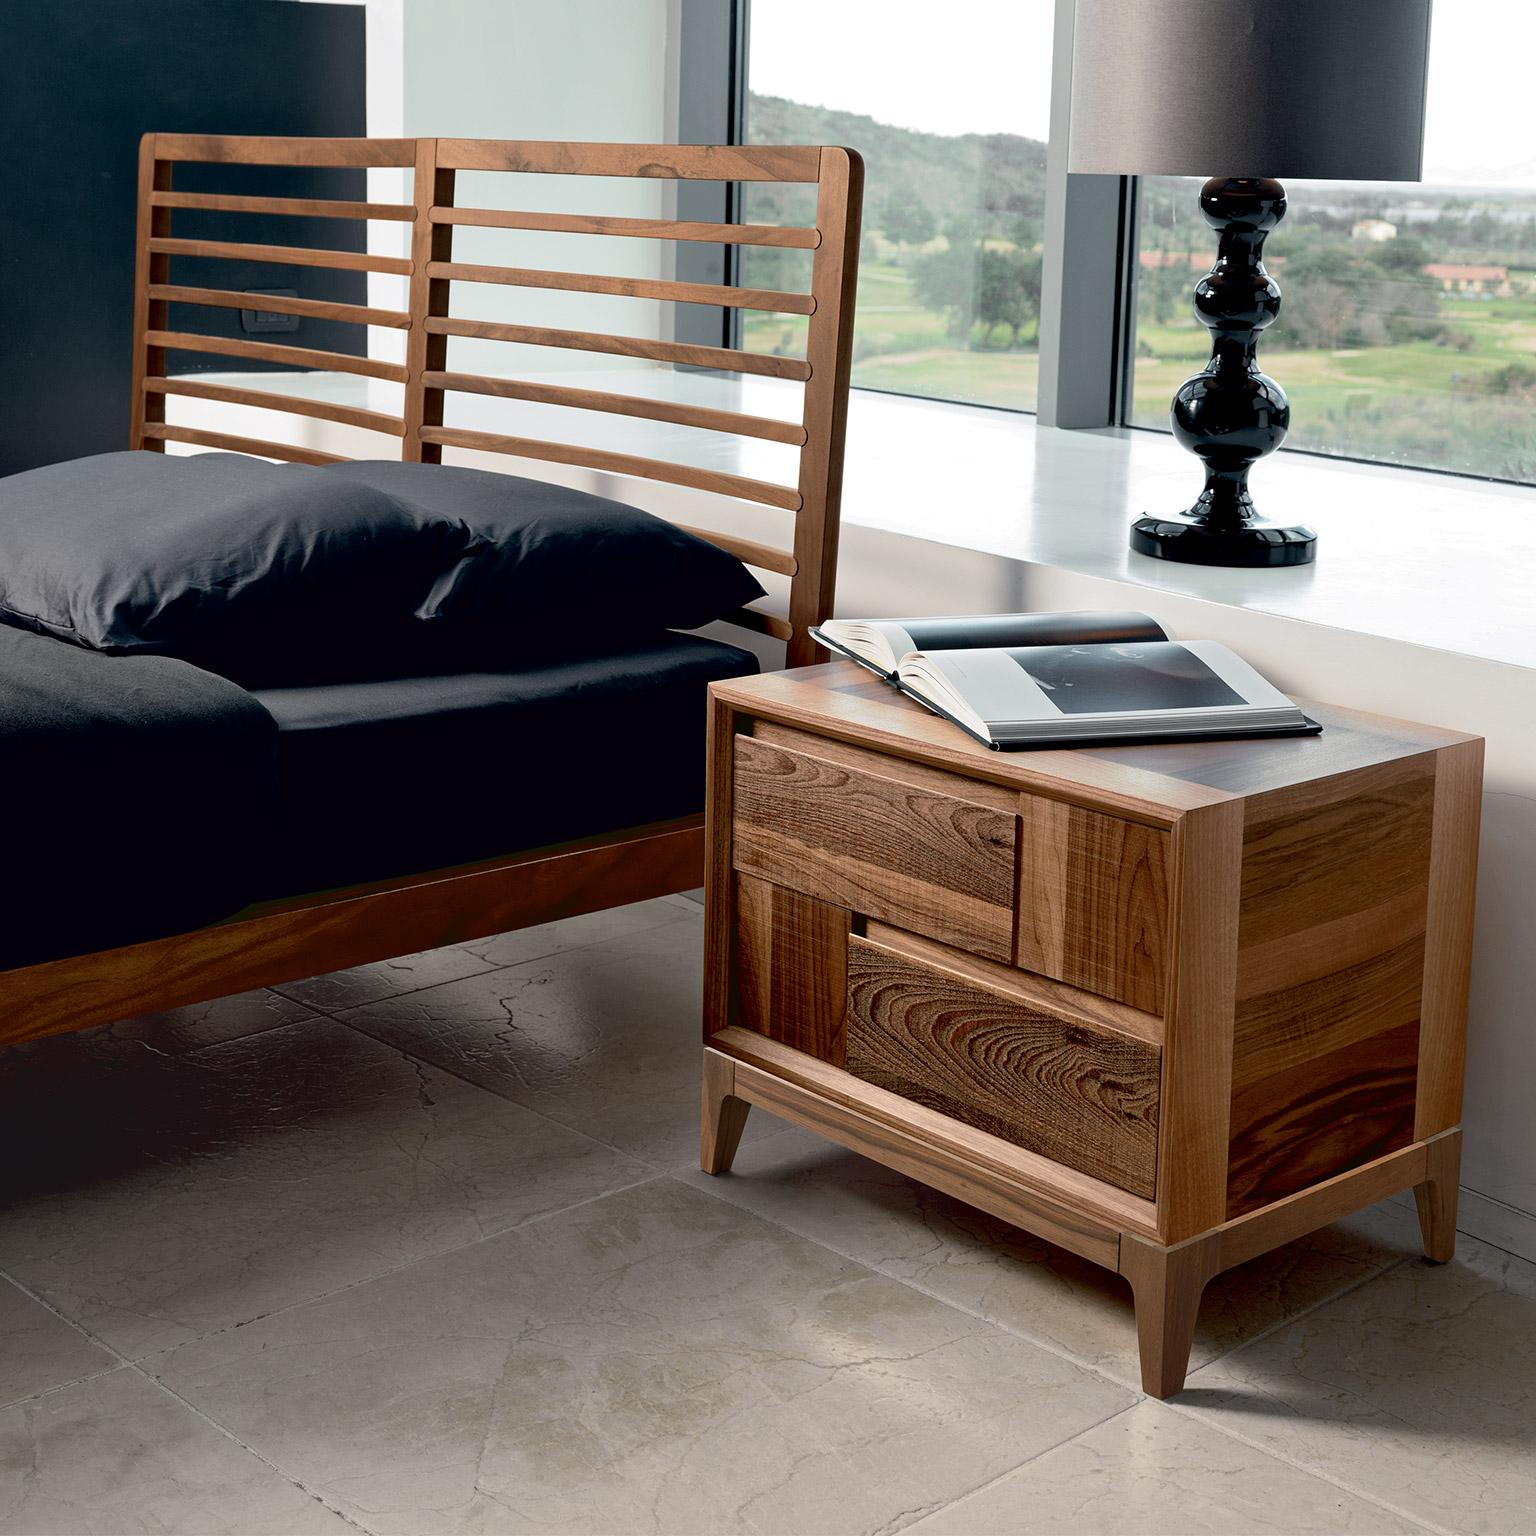 Its linear simplicity fits perfectly with contemporary, timeless interior design. 
The bedside table it's crafted in Italy by expert hands, in premium walnut veneer blackboard, and two drawers in sawn effect solid walnut, oil finish. Since it’s a